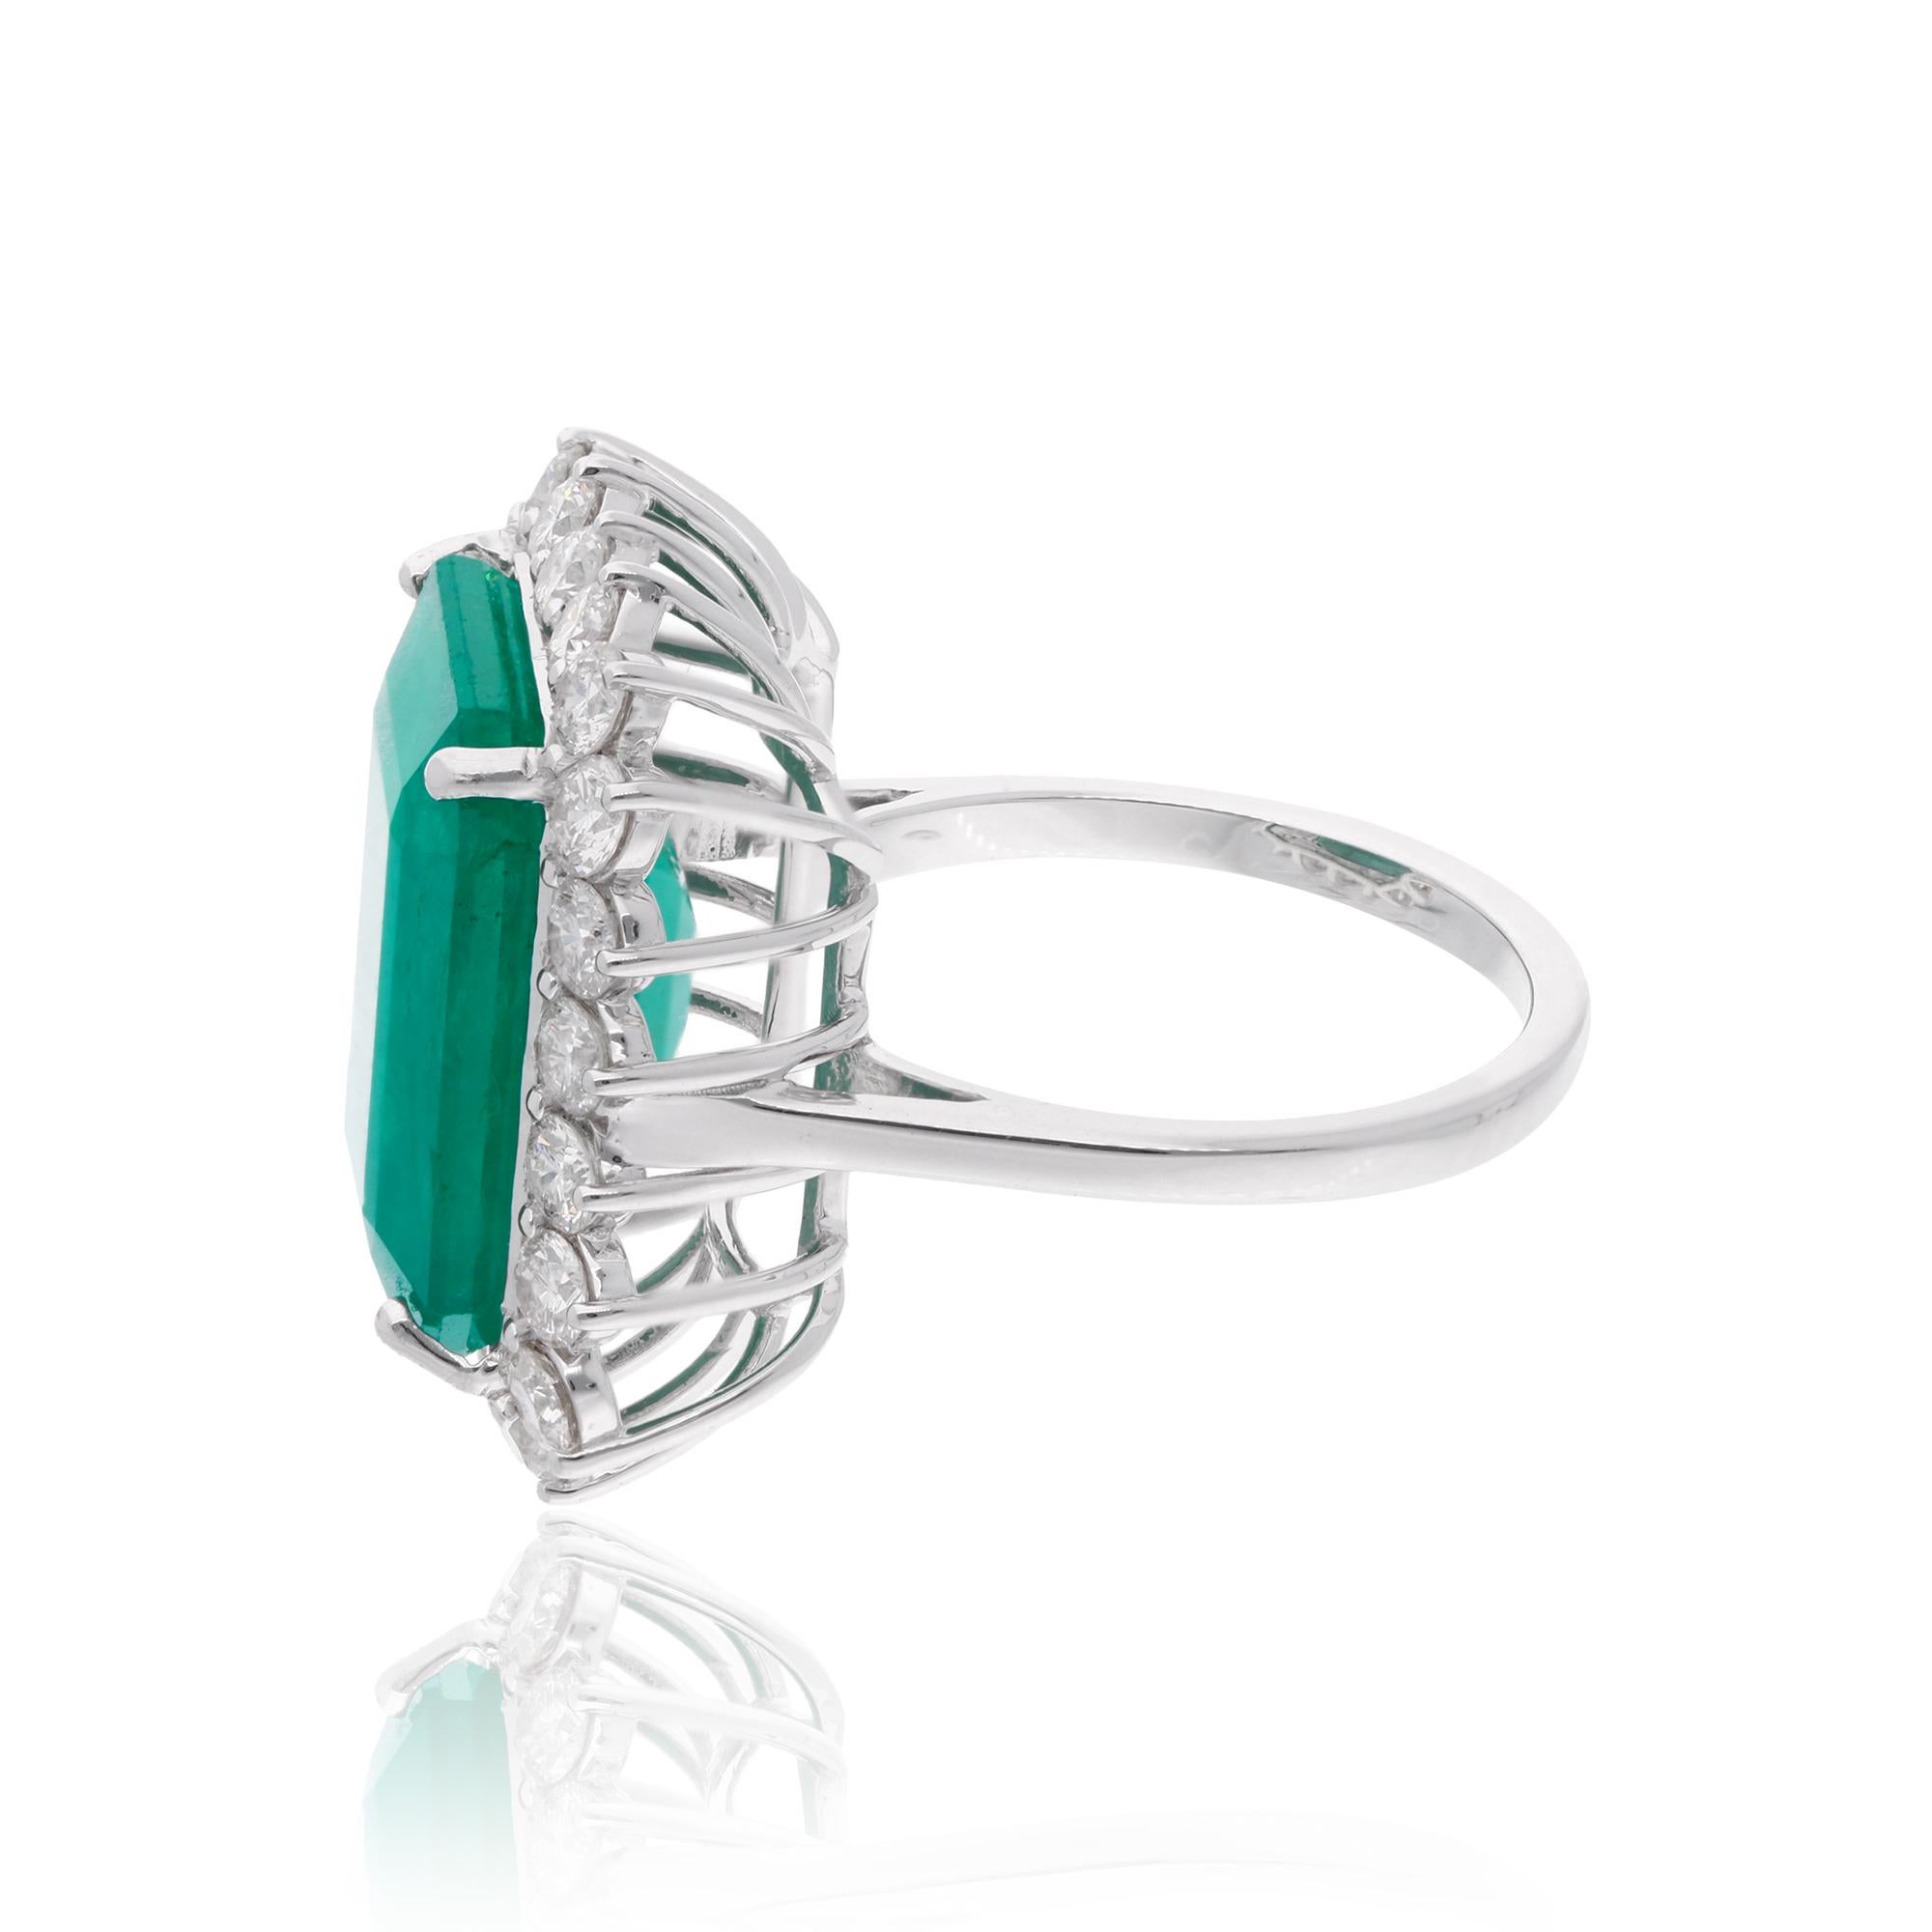 For Sale:  13.87 Total Carat Natural Emerald Gemstone Cocktail Ring Diamond 18k White Gold 2